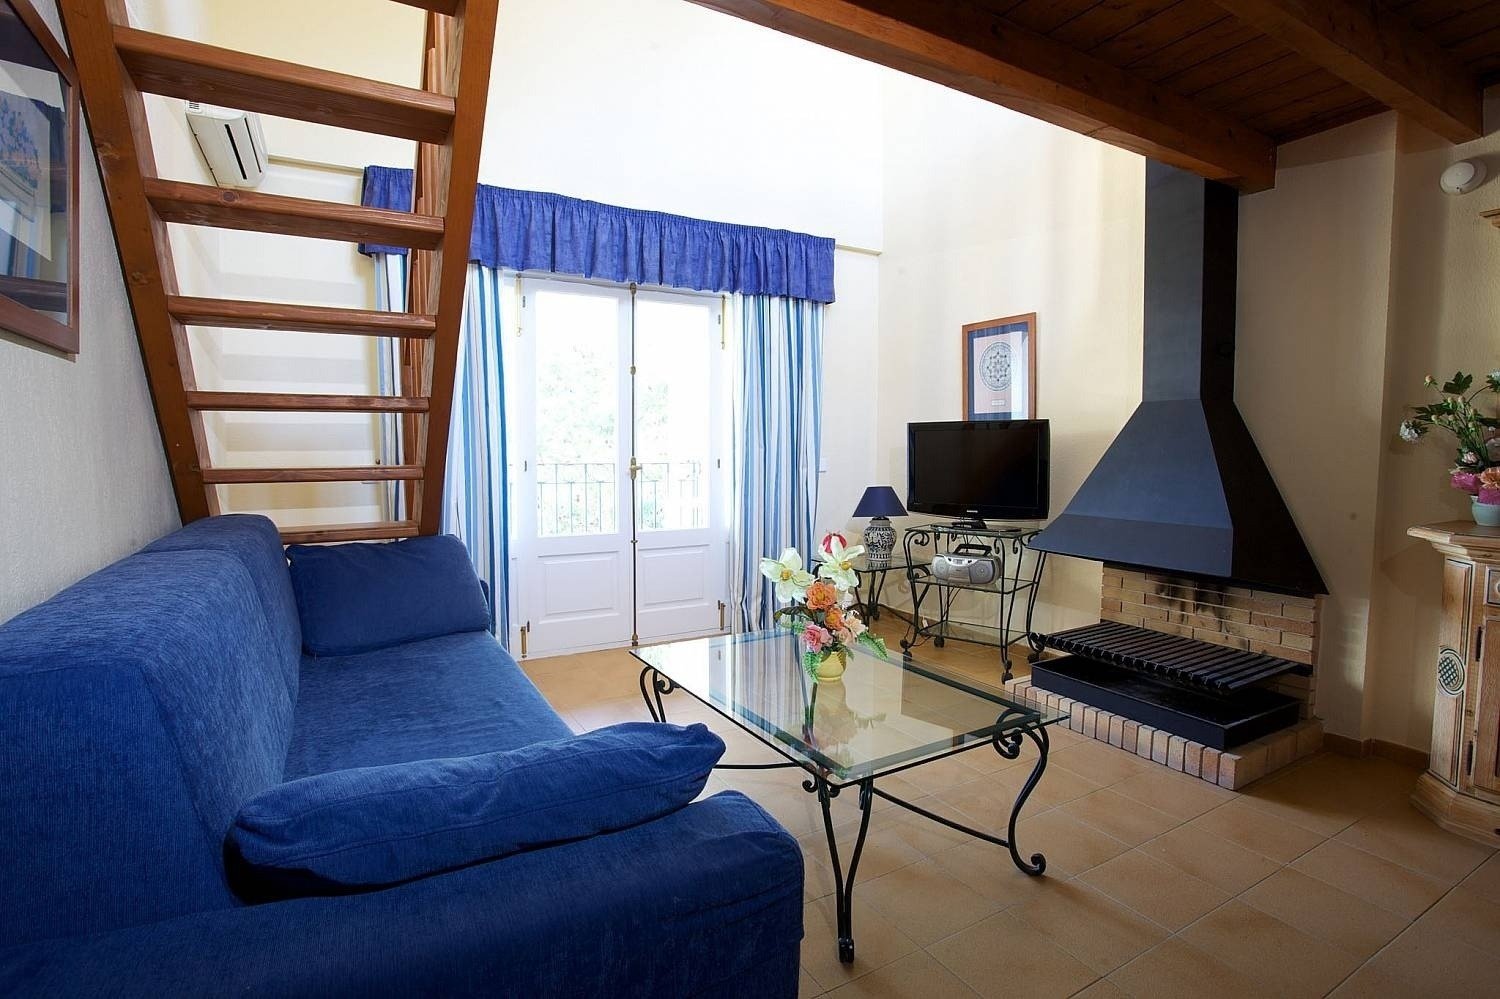 Living room with fireplace in the Ona Cala Pi hotel apartment, in Majorca